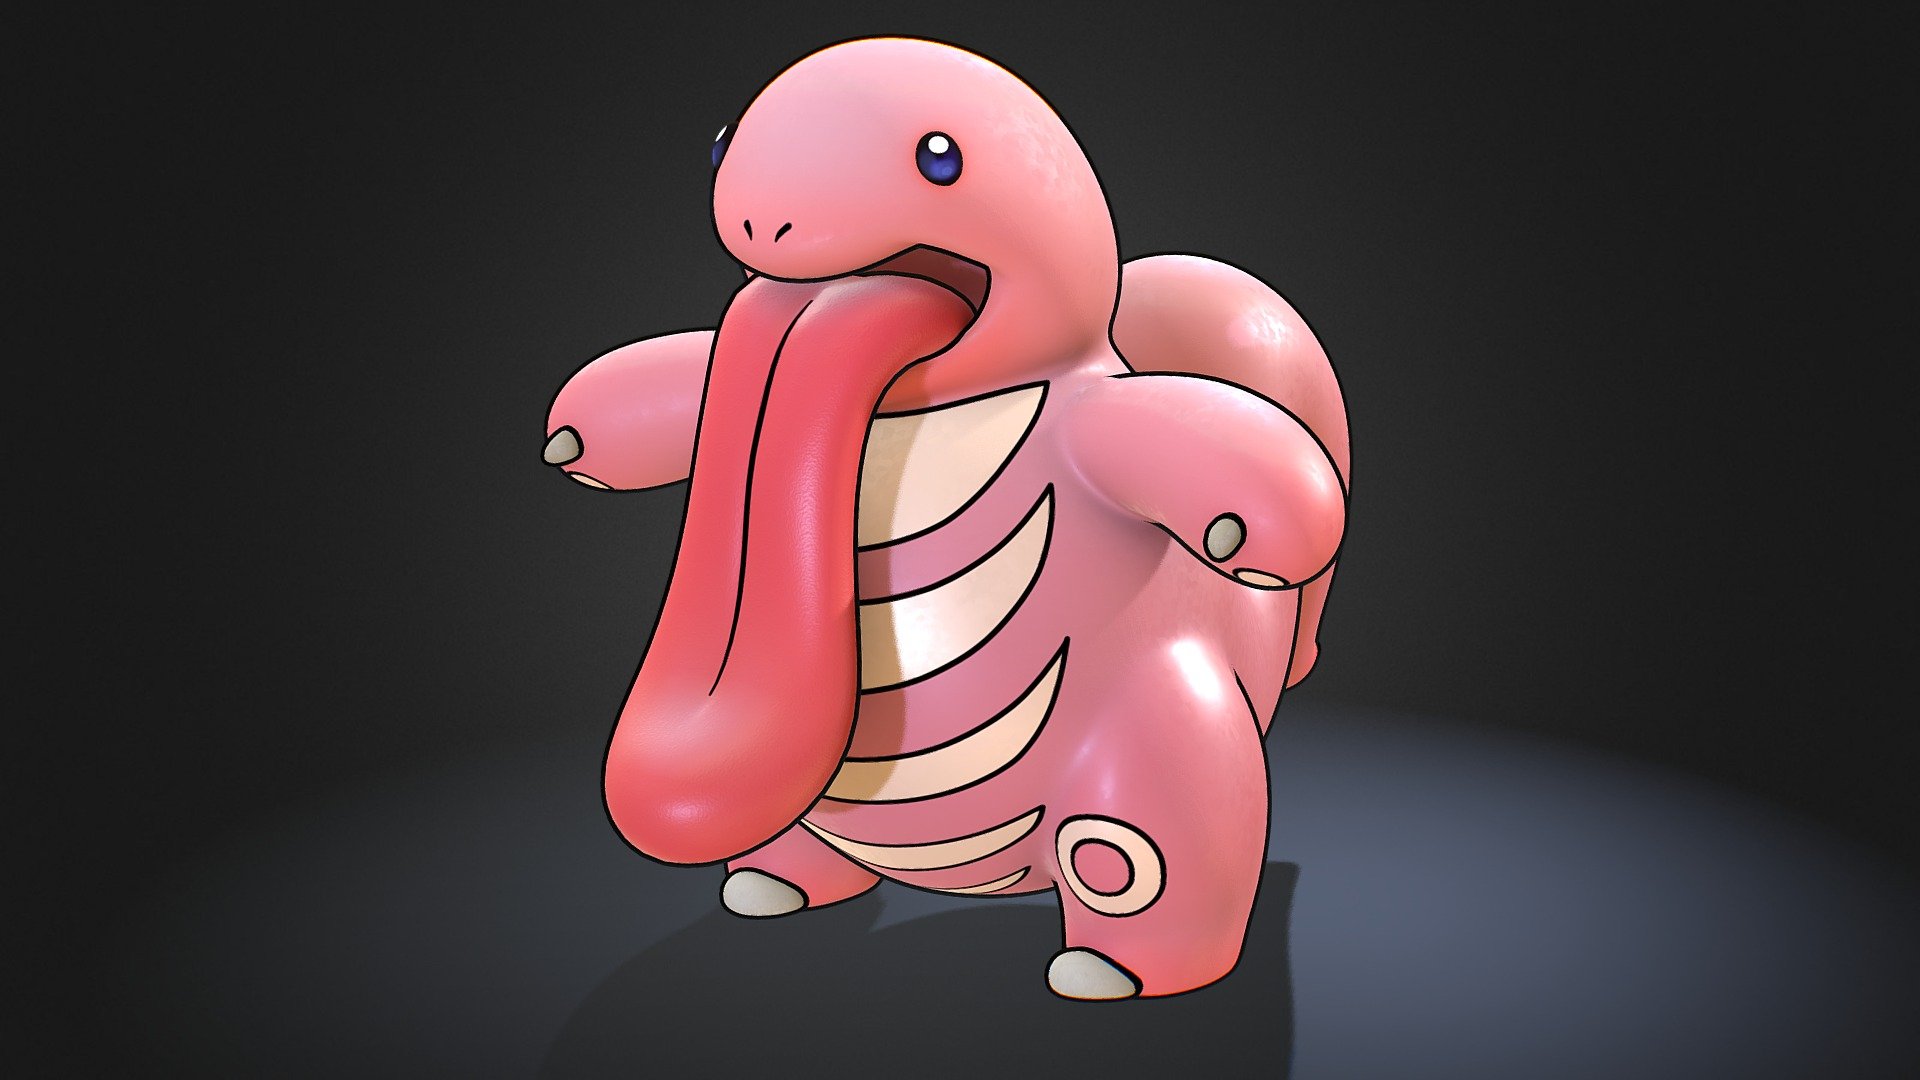 Pink one - Lickitung Pokemon - 3D model by 3dlogicus 3d model